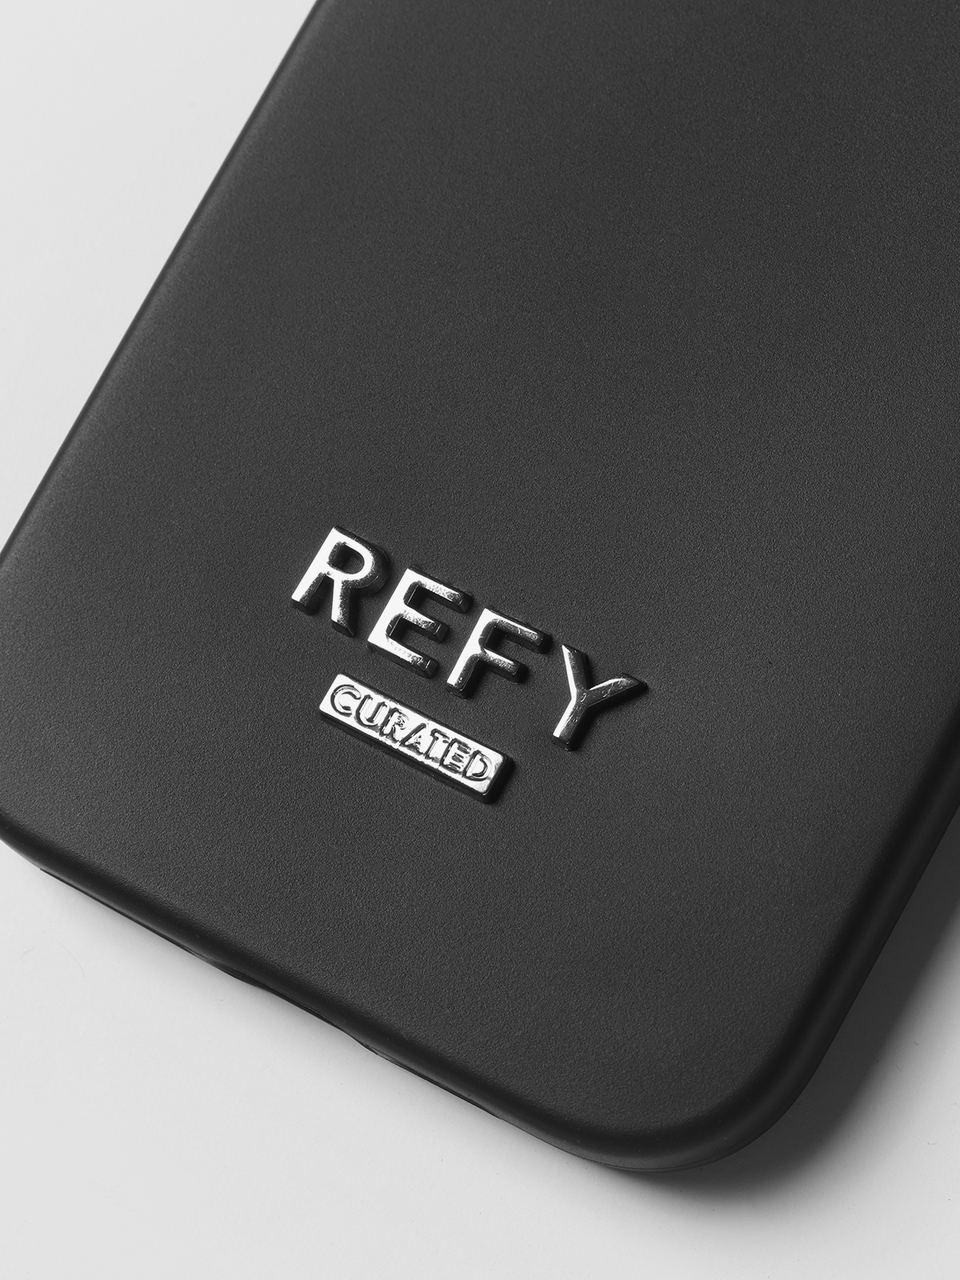 CLOSE UP IMAGE OF METAL REFY CURATED LOGO TO BACK OF PHONE CASE